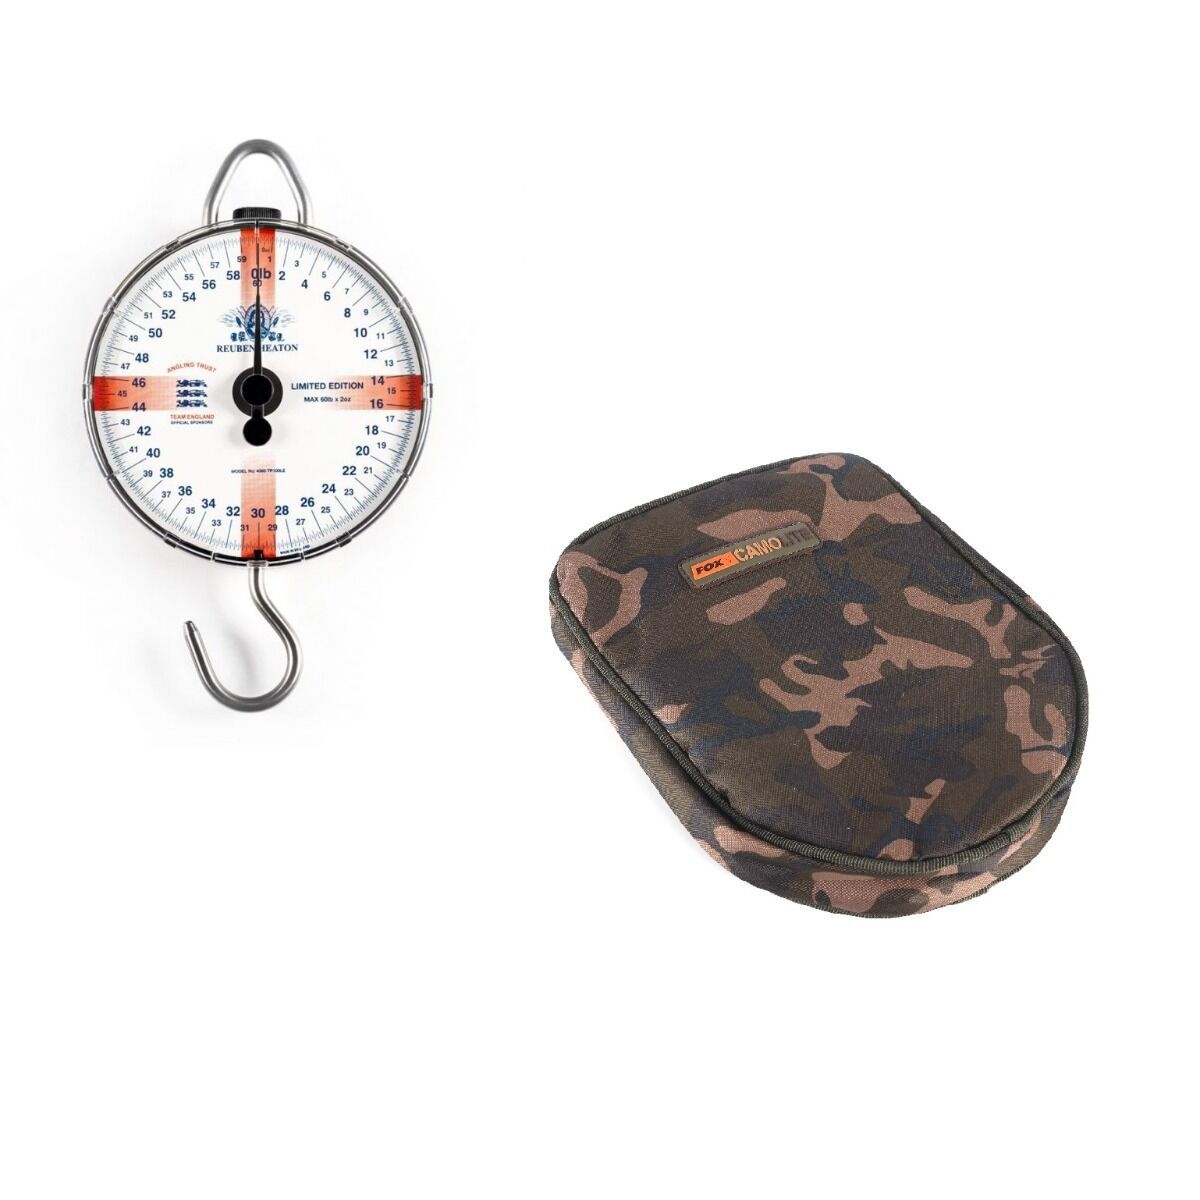 discount sale Korda Limited Edition Scale By Reuben Heaton/Carp Fishing